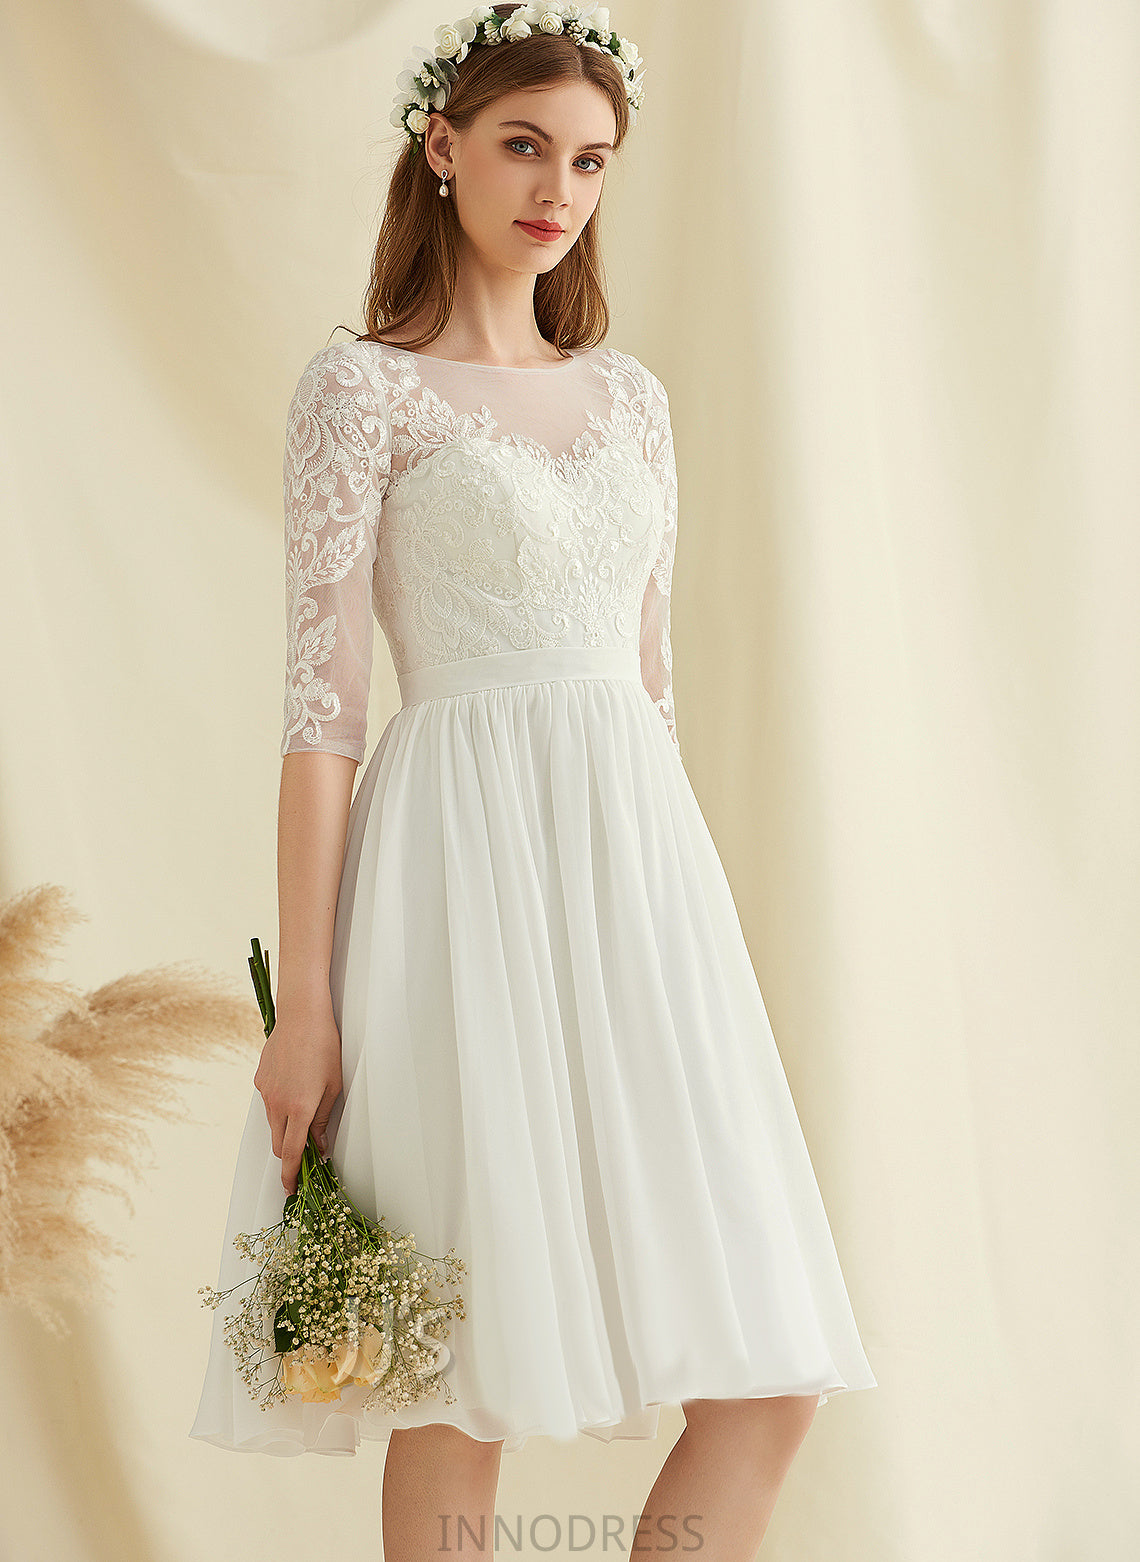 Dress Sequins Scoop Wedding Knee-Length A-Line Chiffon Wedding Dresses Neck Lace Karli With